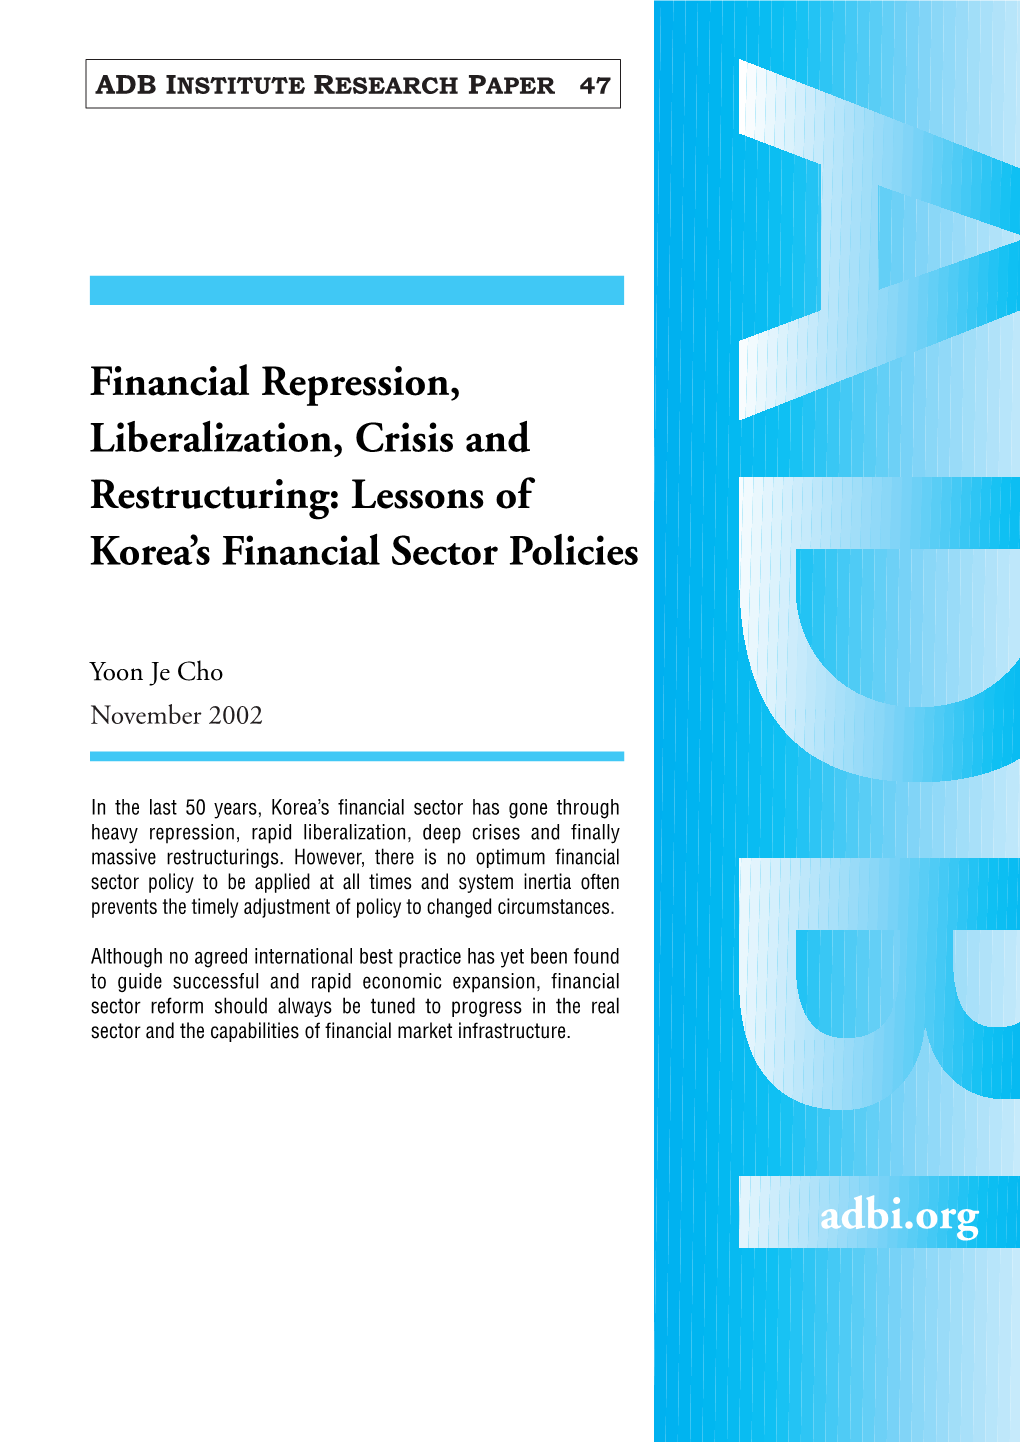 Lessons of Korea's Financial Sector Policies